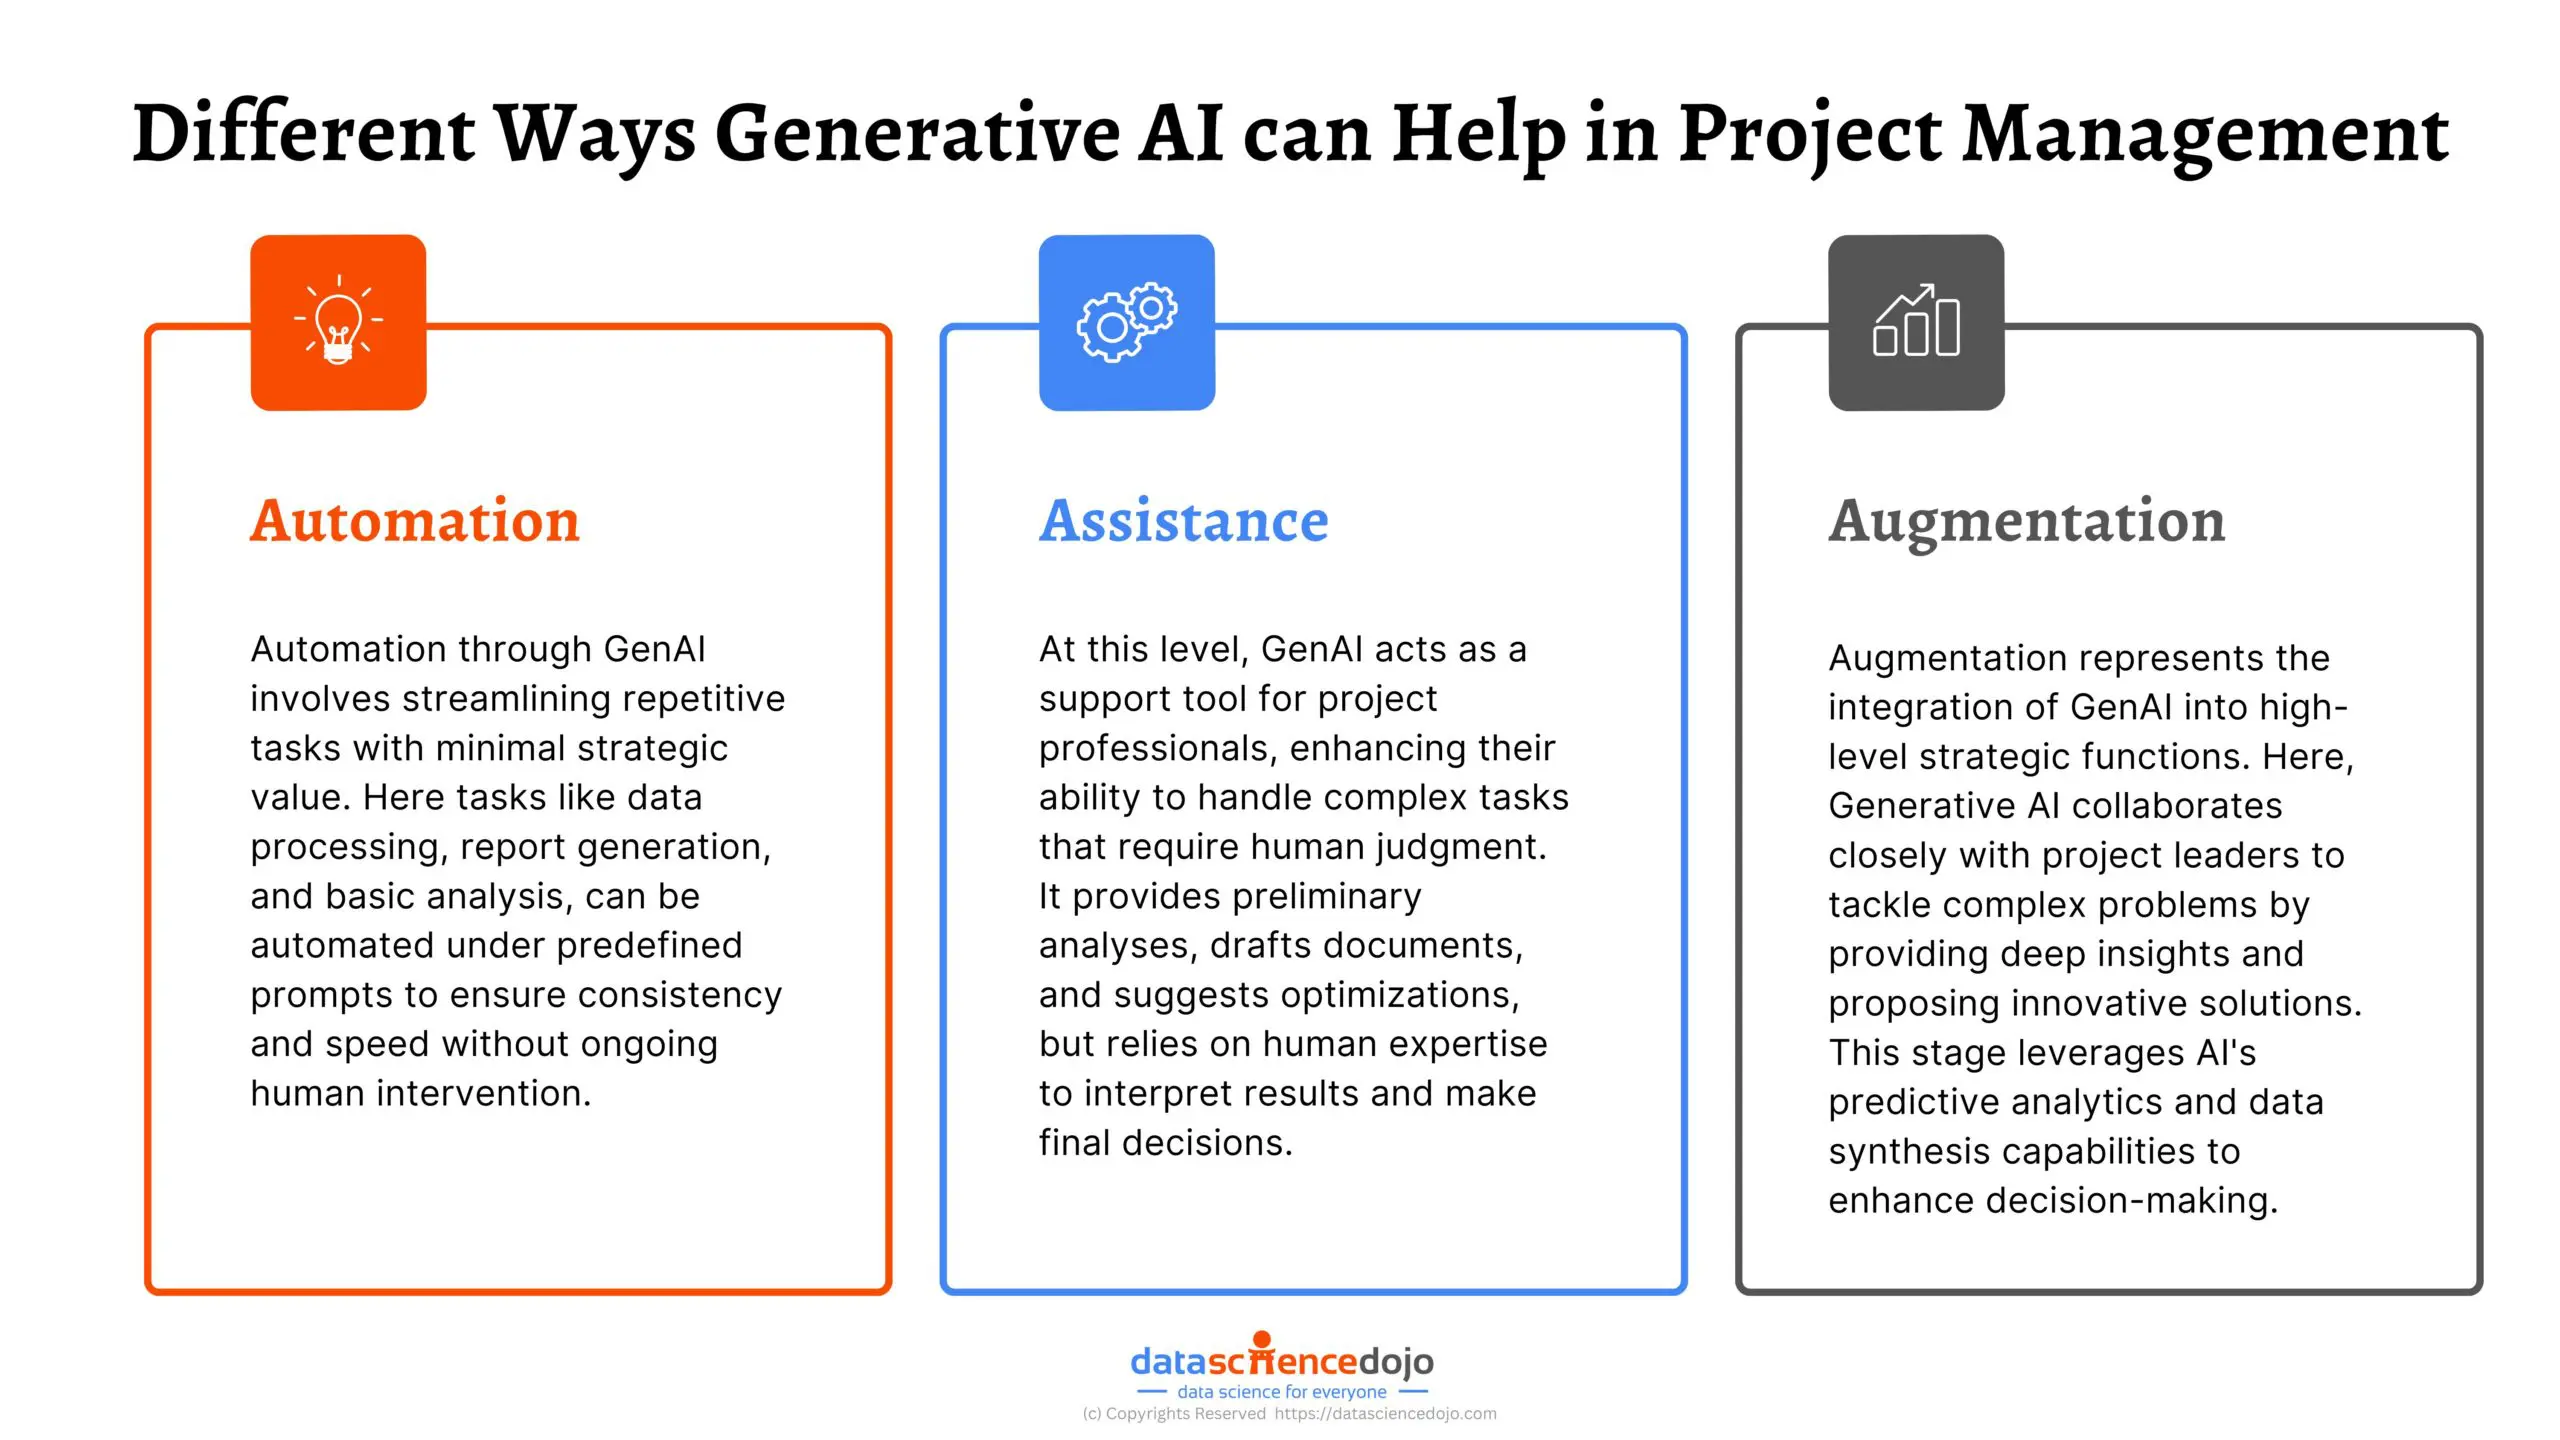 Different Ways Generative AI can Help in AI Project Management